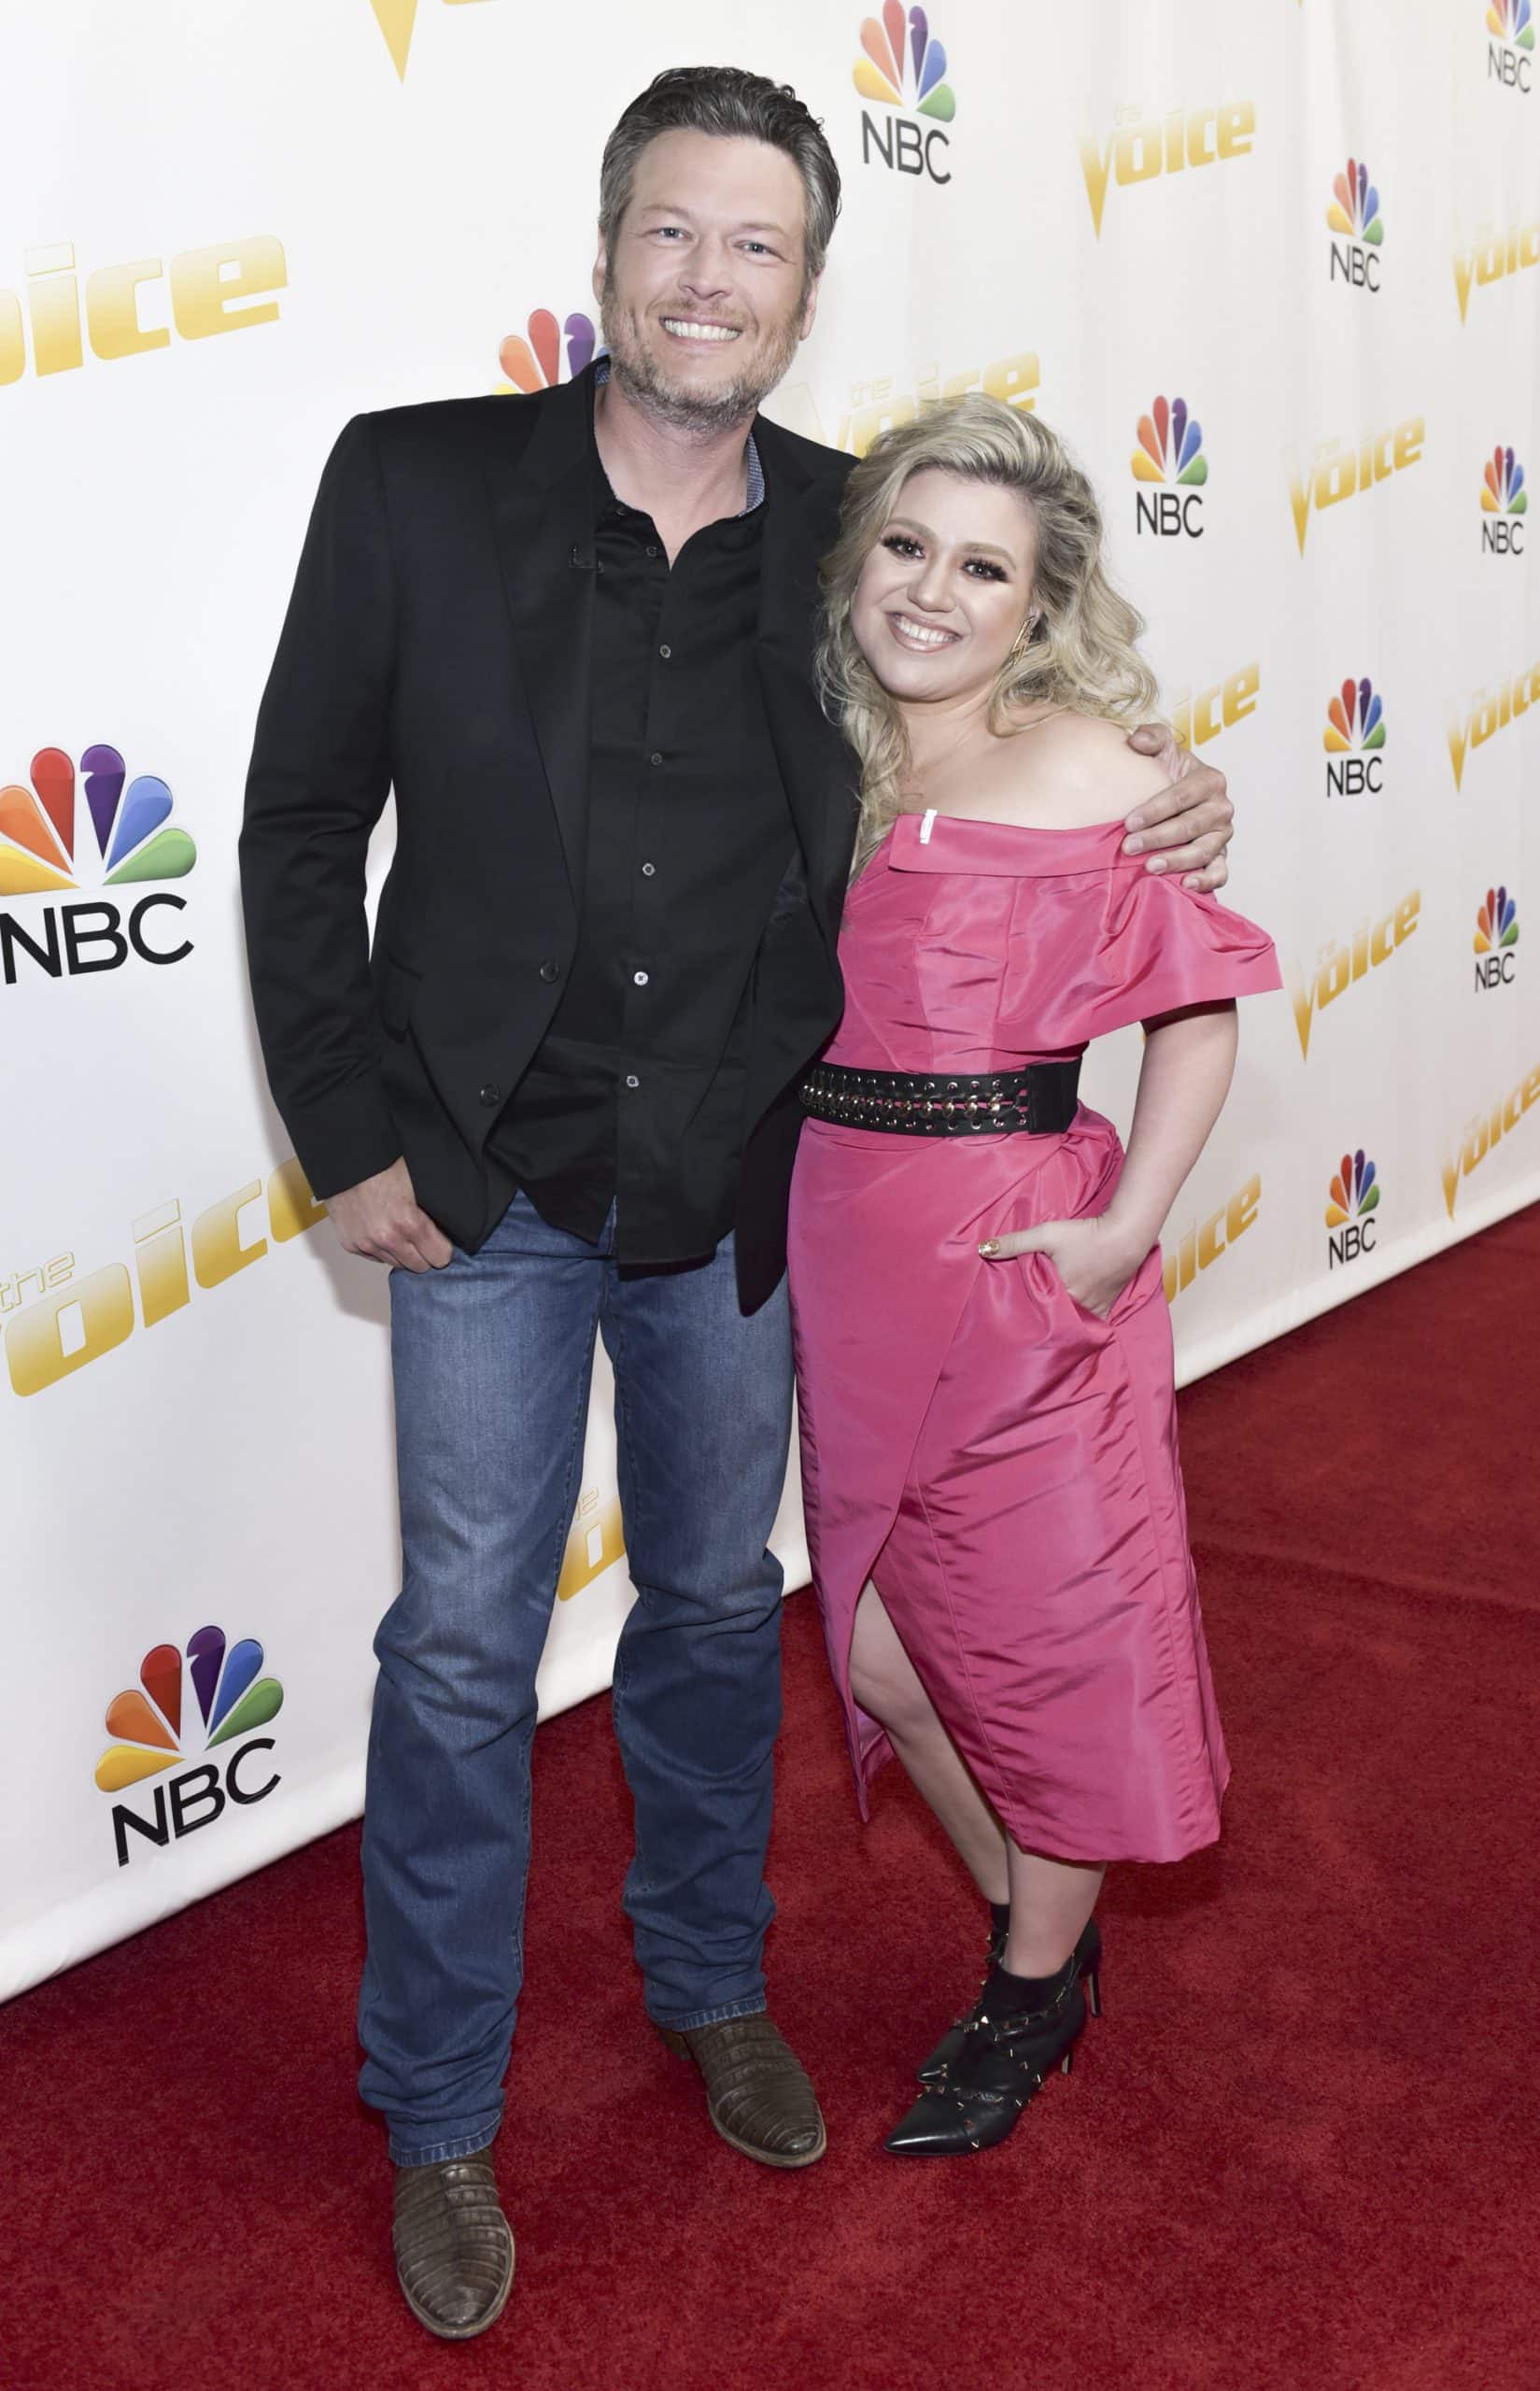 Blake Shelton and Kelly Clarkson in 2018